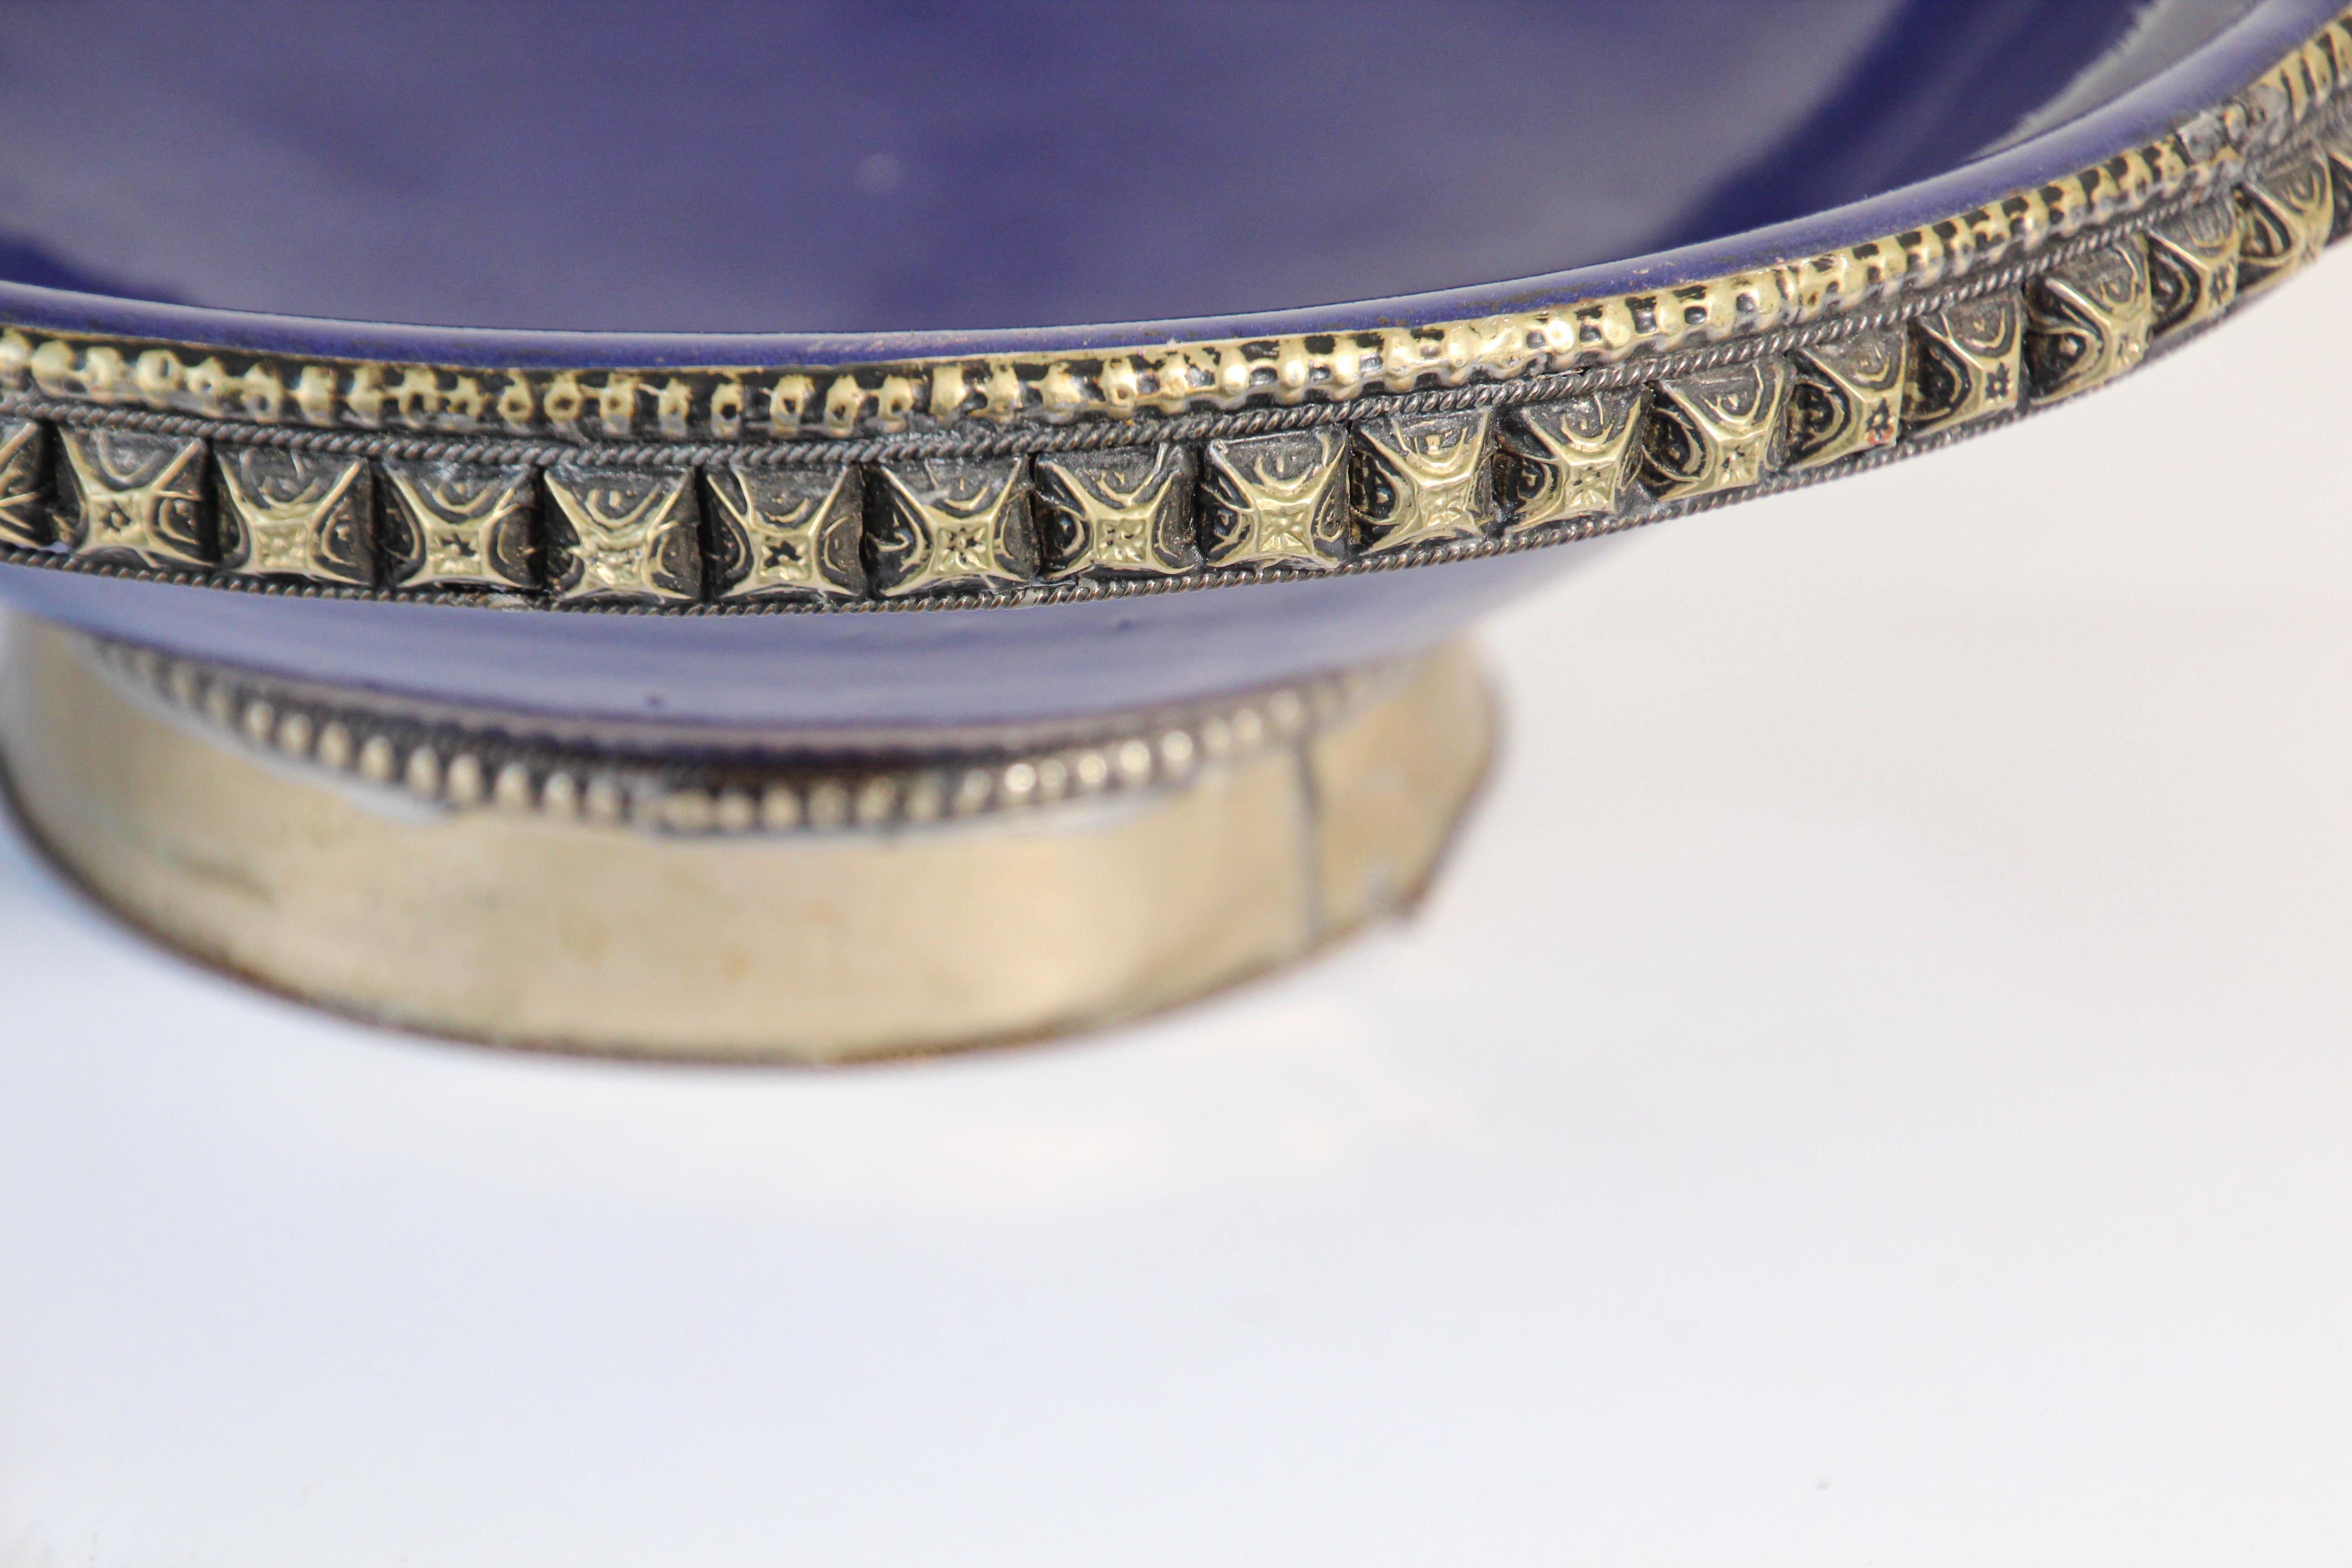 Cobalt Blue Moroccan Ceramic Bowl with Silver Overlay In Good Condition For Sale In North Hollywood, CA